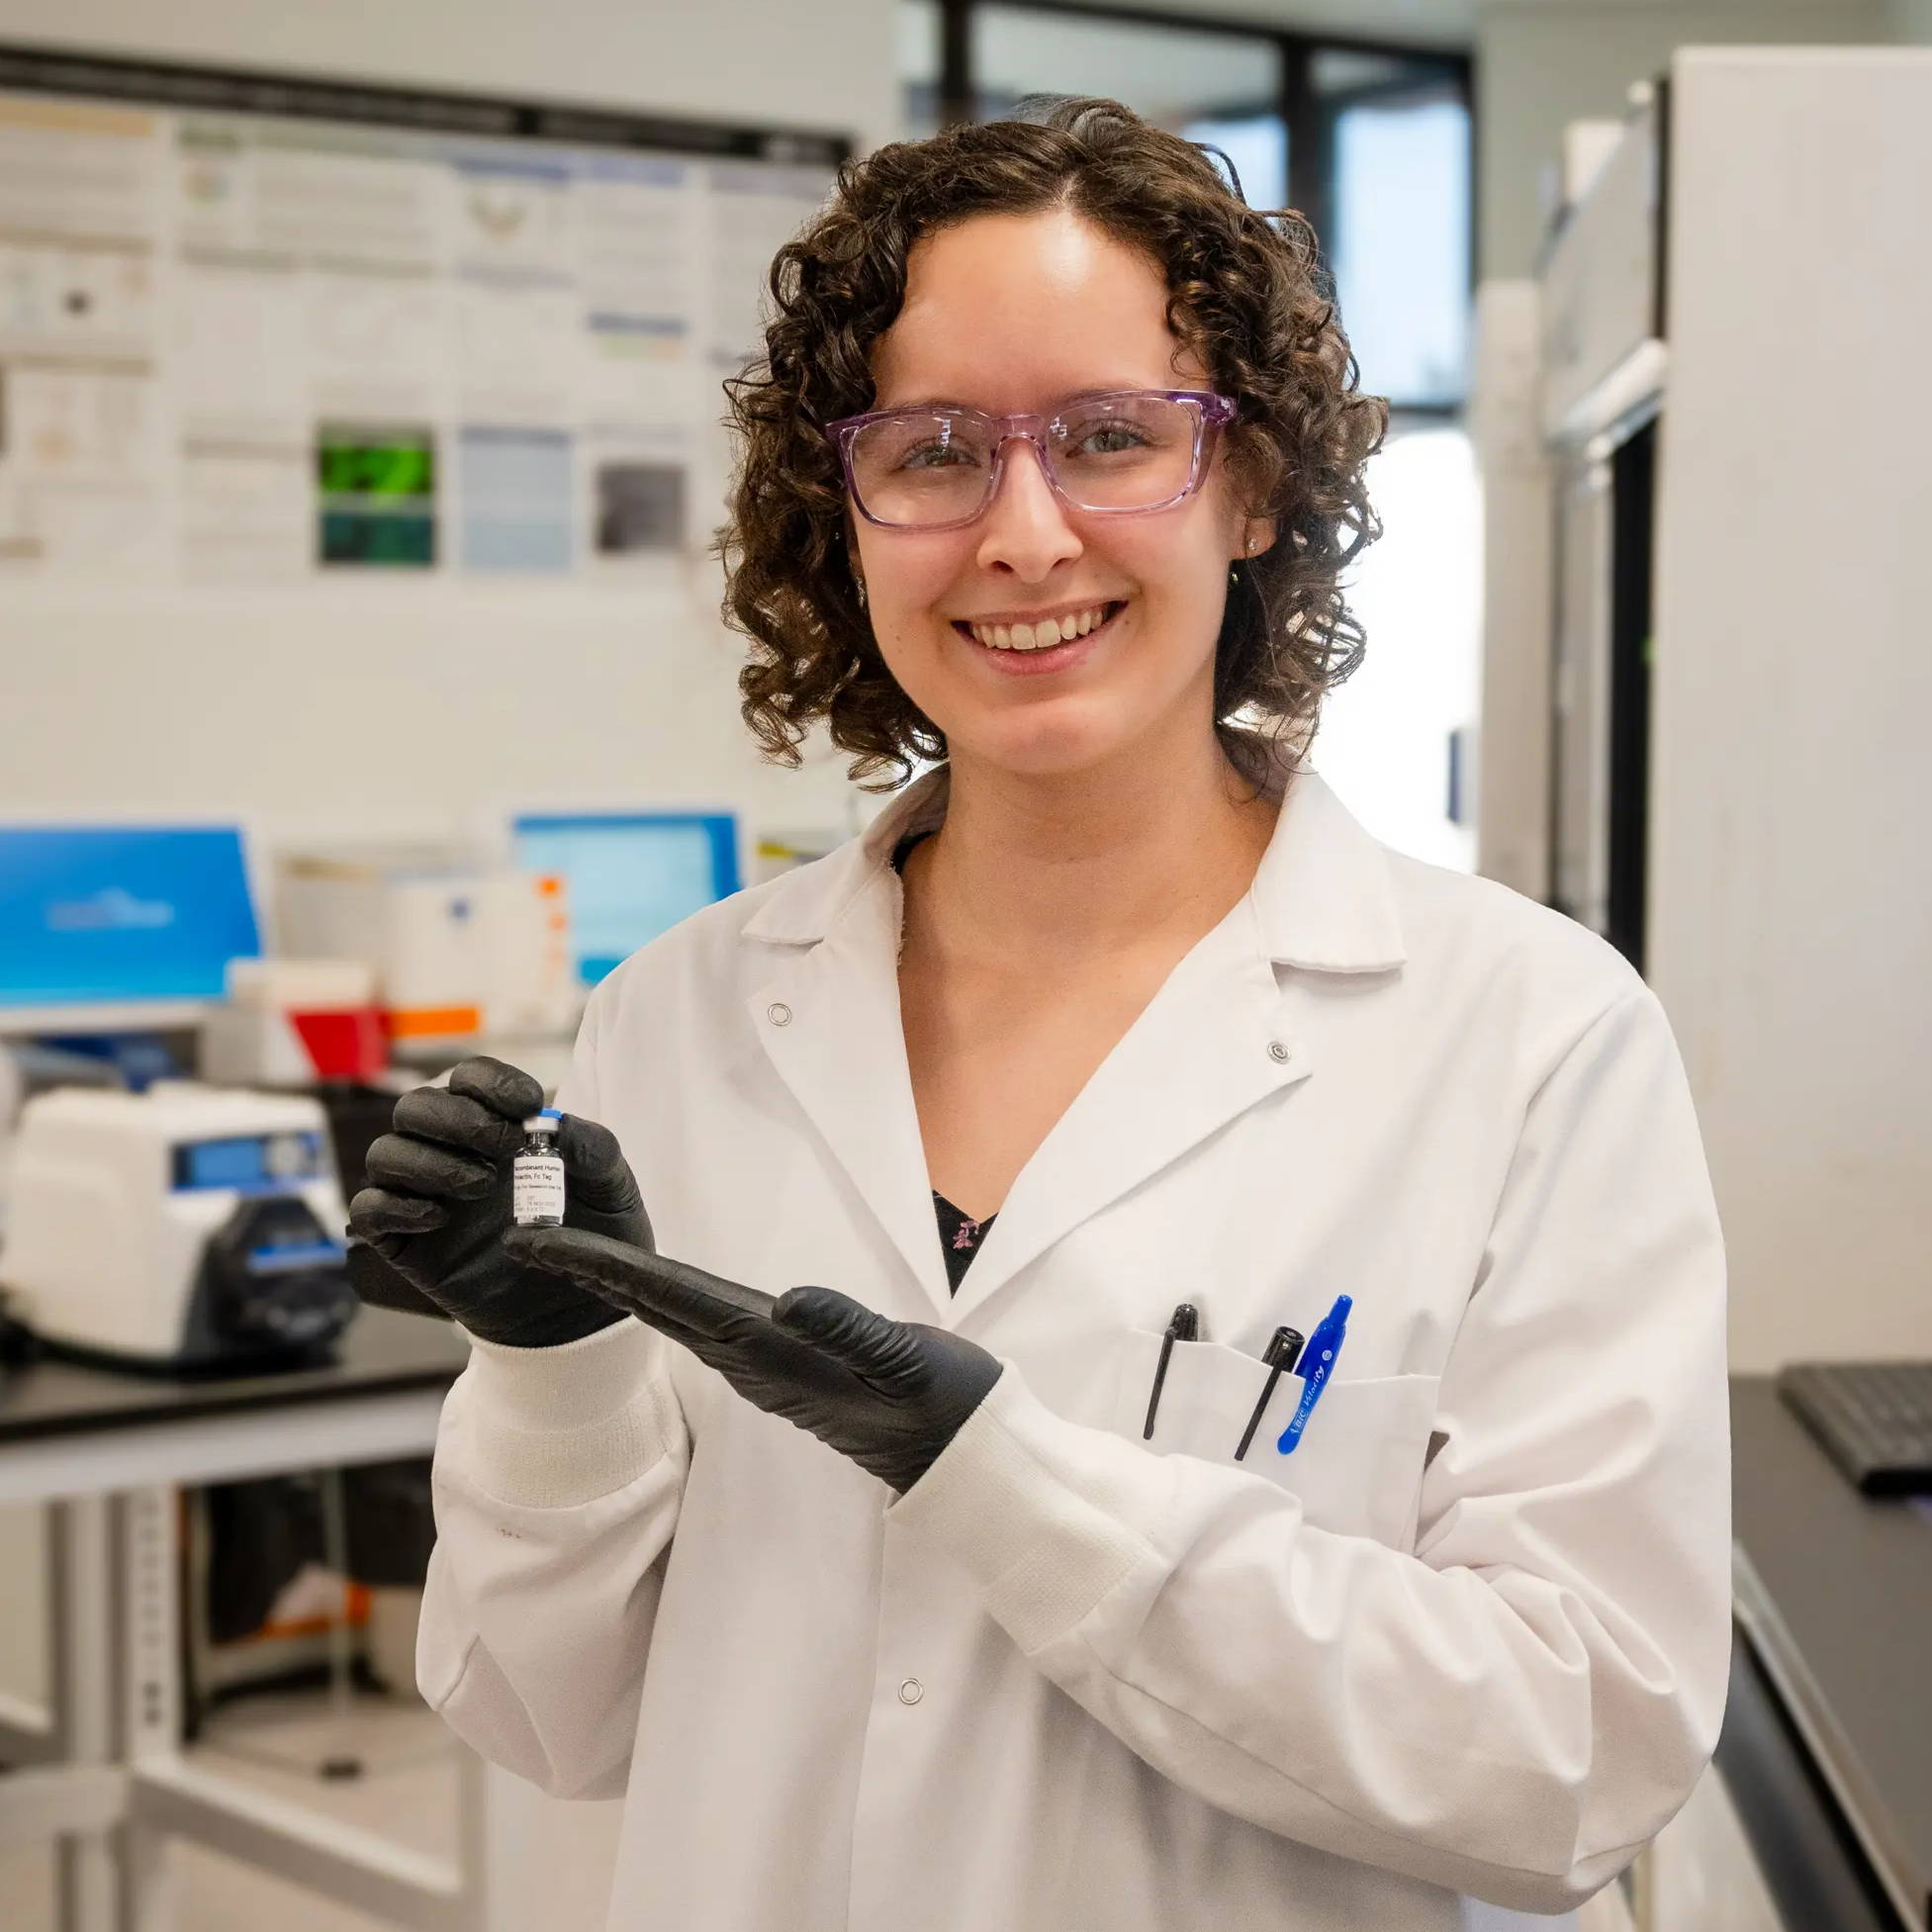 Women in STEM - Future Fields Senior Research Scientist Paige holding a vial of recombinant human prolactin, Fc tag